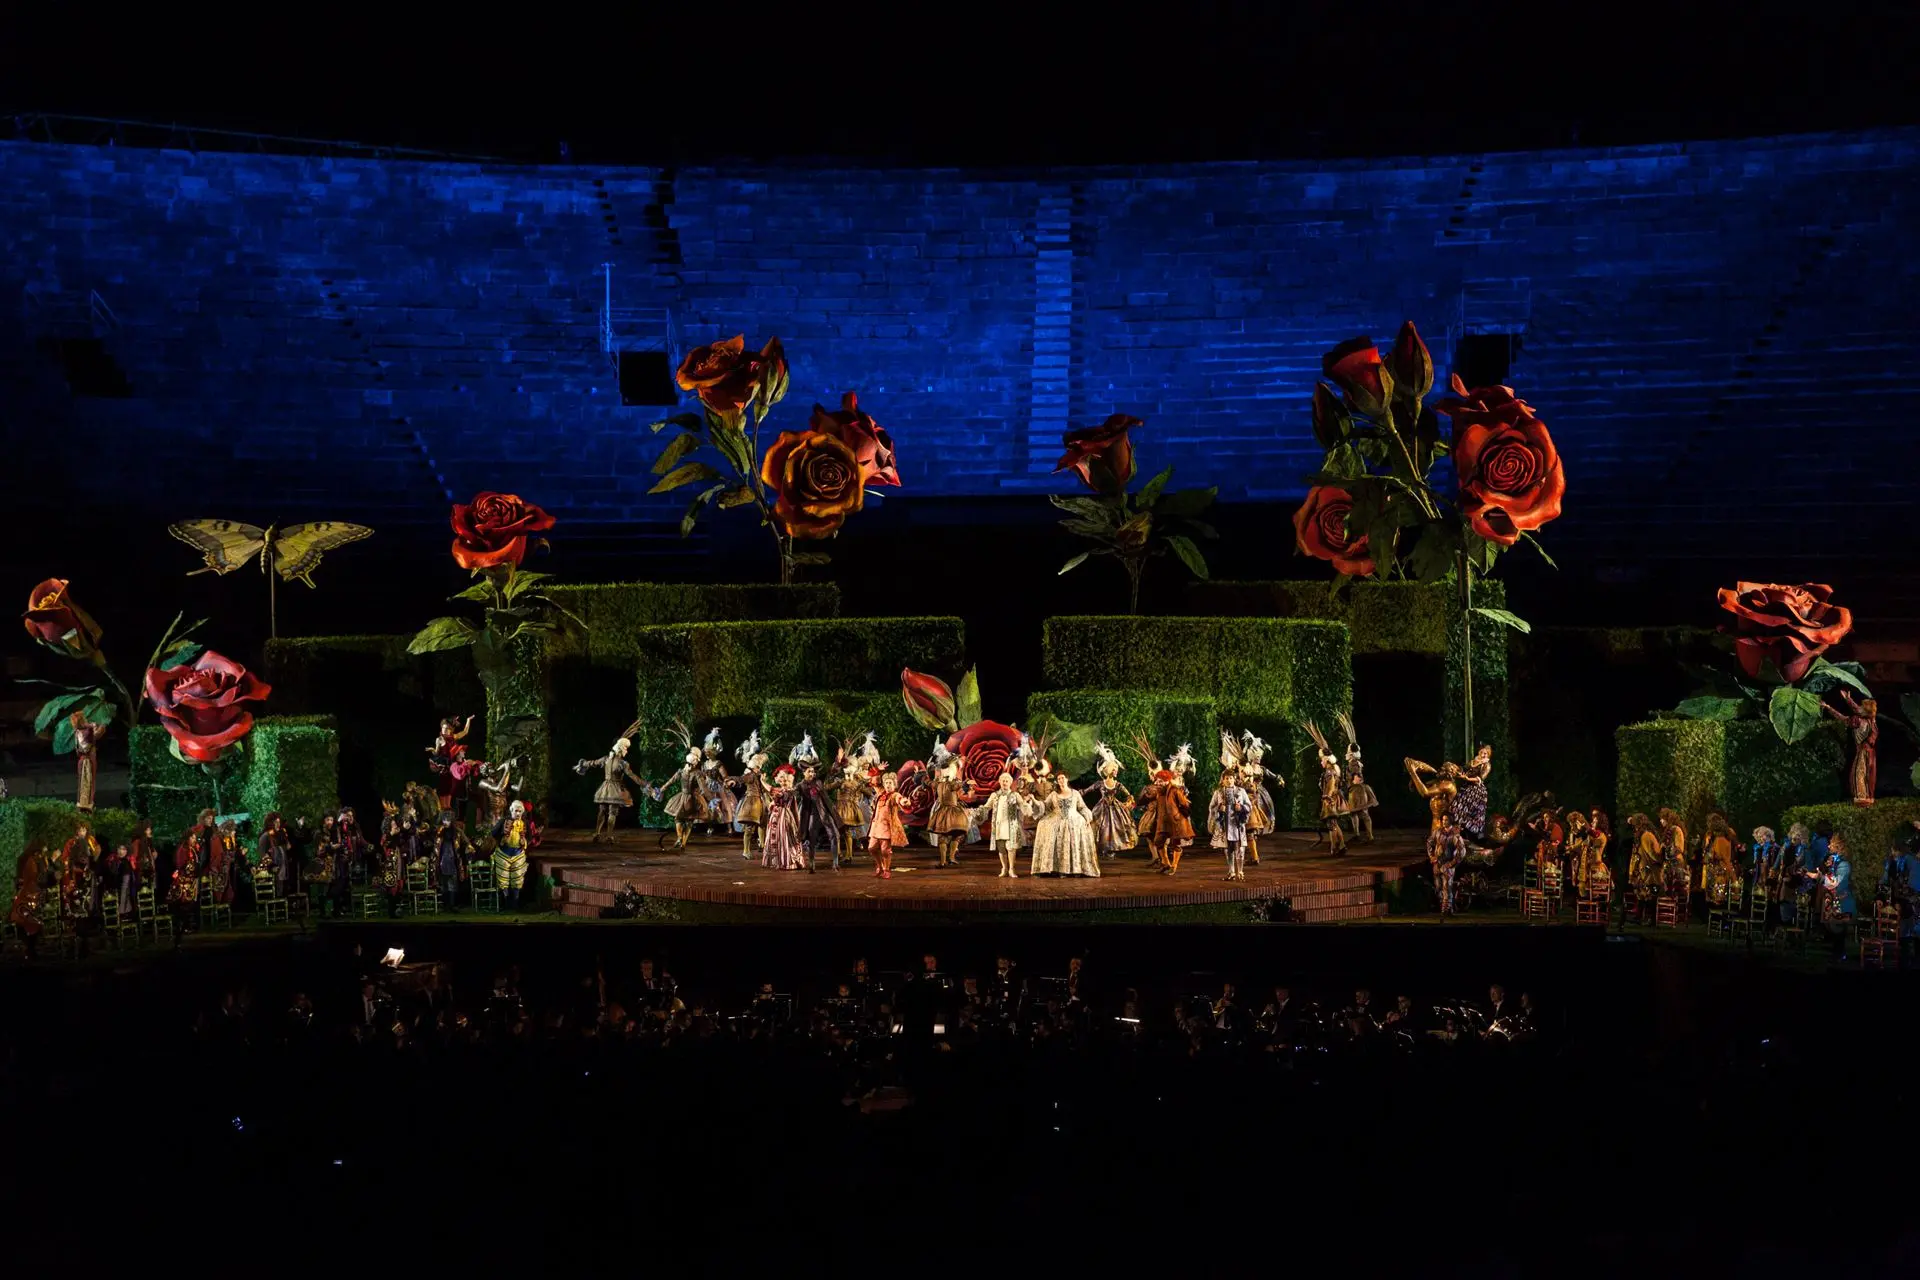 The stage is entirely taken up by the labyrinth resting on the circular base. It is surrounded by 12 roses, and, on the left, there is a giant colorful butterfly made out of papier-mâché. Its wings are open and it is positioned on top of a long pole fixed to the floor of the stage. In front of it stand approximately 20 danseurs and ballerinas dressed in splendid eighteenth-century costumes, along with the rest of the characters in the opera who are also wearing clothing of the same period. Among them are also the Count and Rosina who are holding each other’s hands. At the far left and right of the scene, there are approximately 30 chairs on each side. Some are bright green in color and others are orange. Near the chairs stands the chorus.